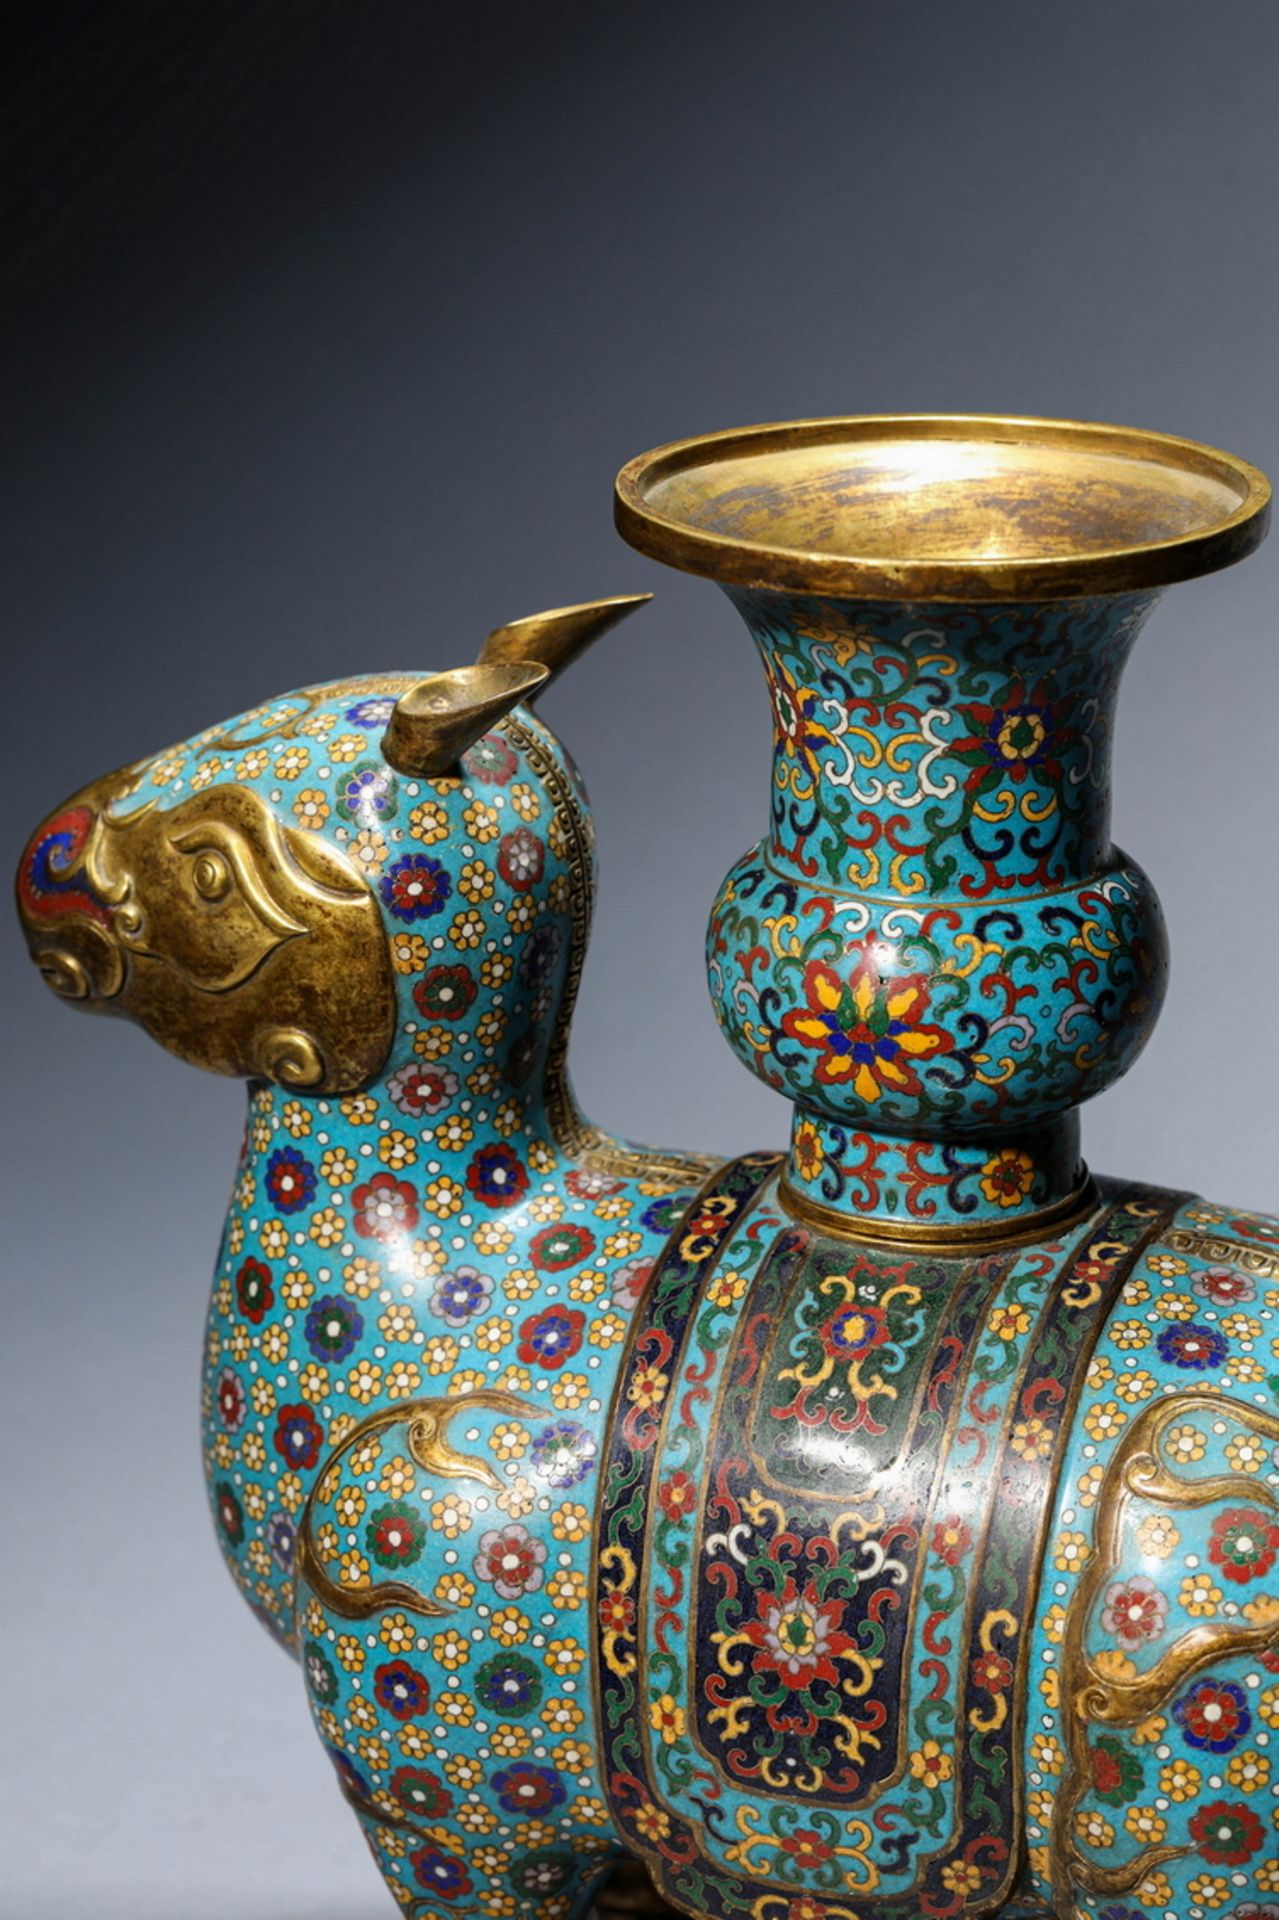 FINE CHINESE CLOISONNE, 17TH/18TH Century Pr.  Collection of NARA private gallary.  - Bild 2 aus 7